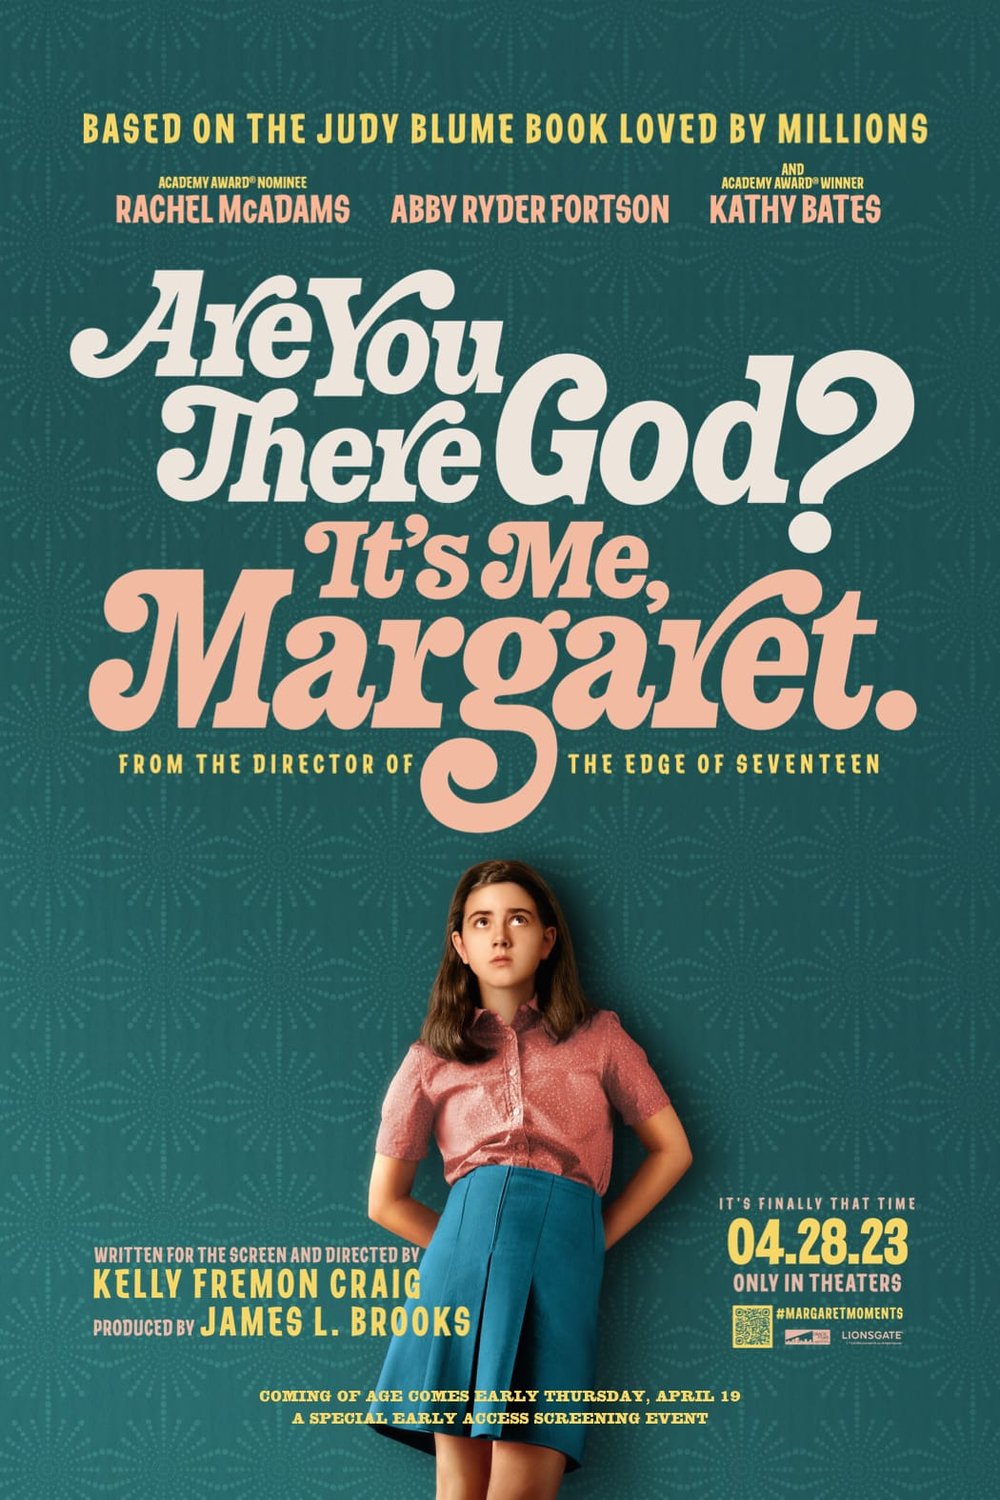 L'affiche du film Are You There God? It's Me, Margaret.